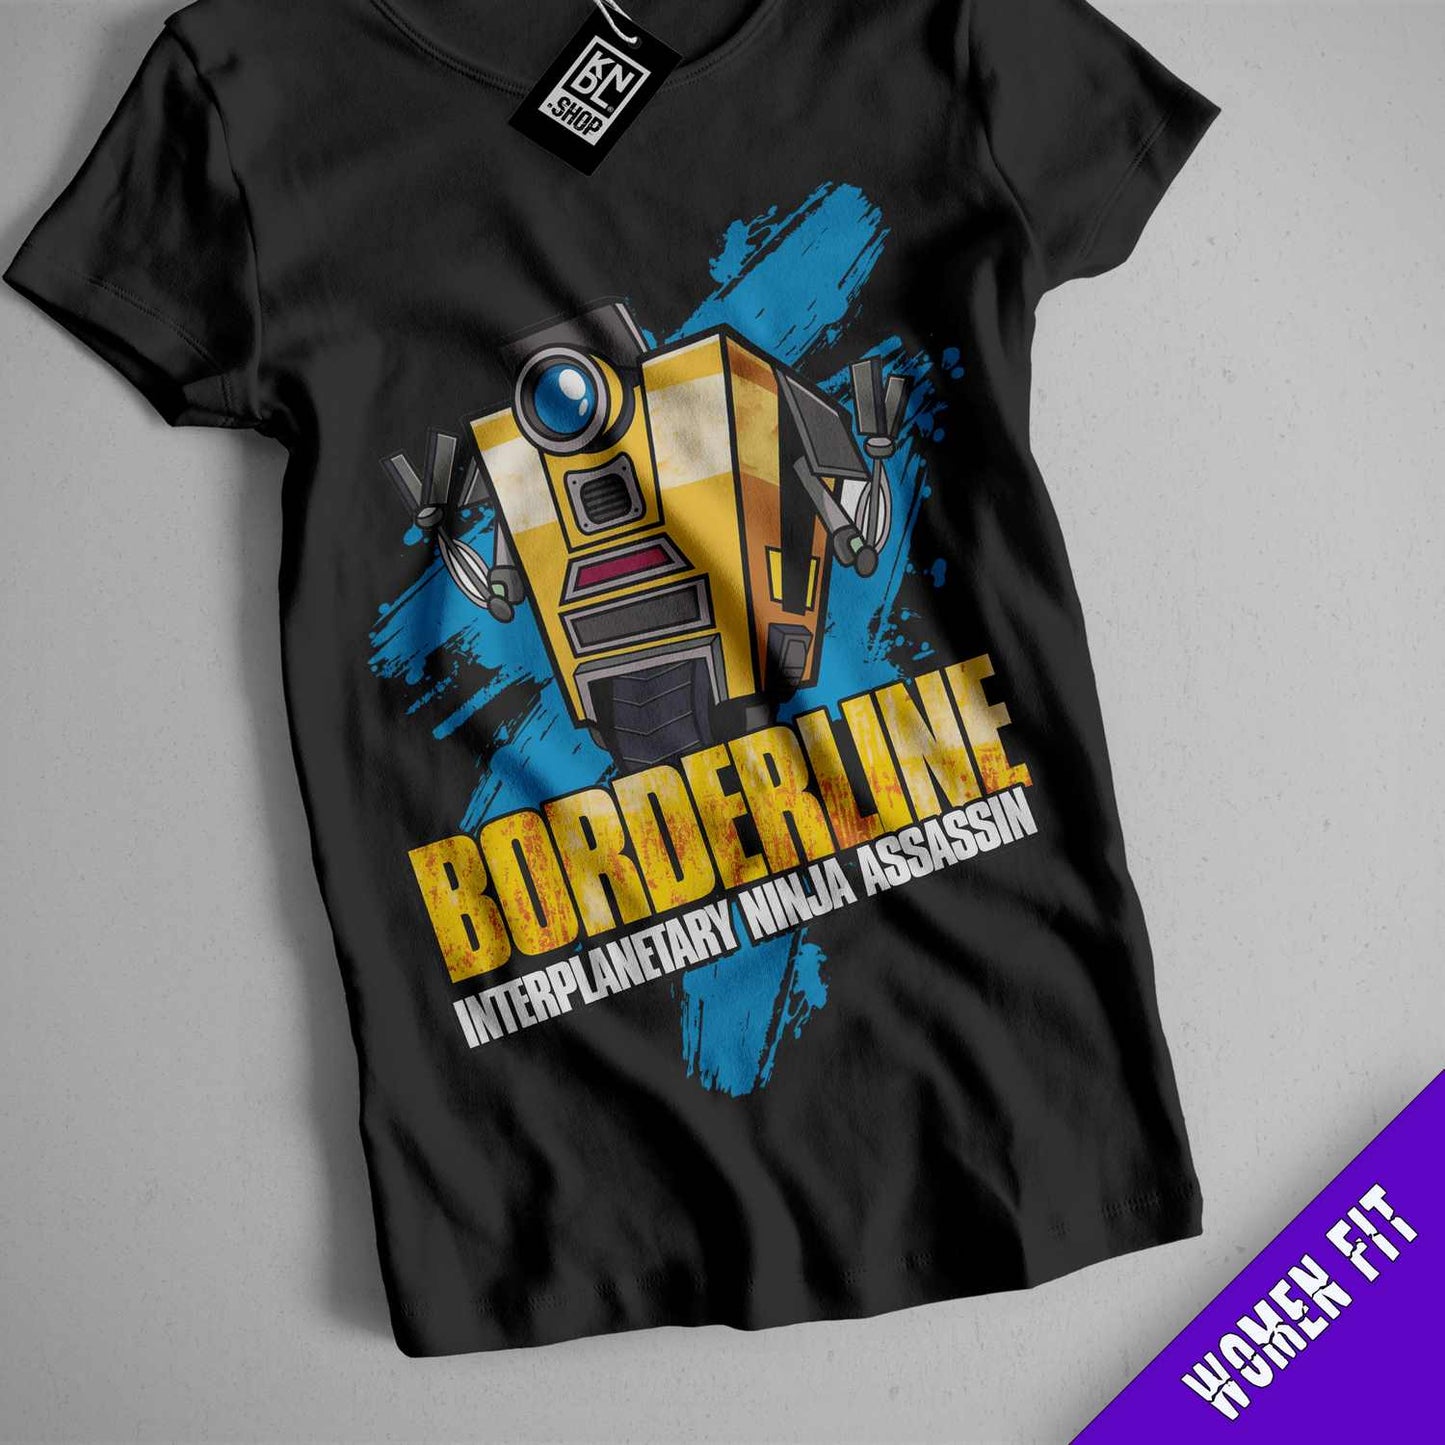 a black shirt with a yellow and blue robot on it